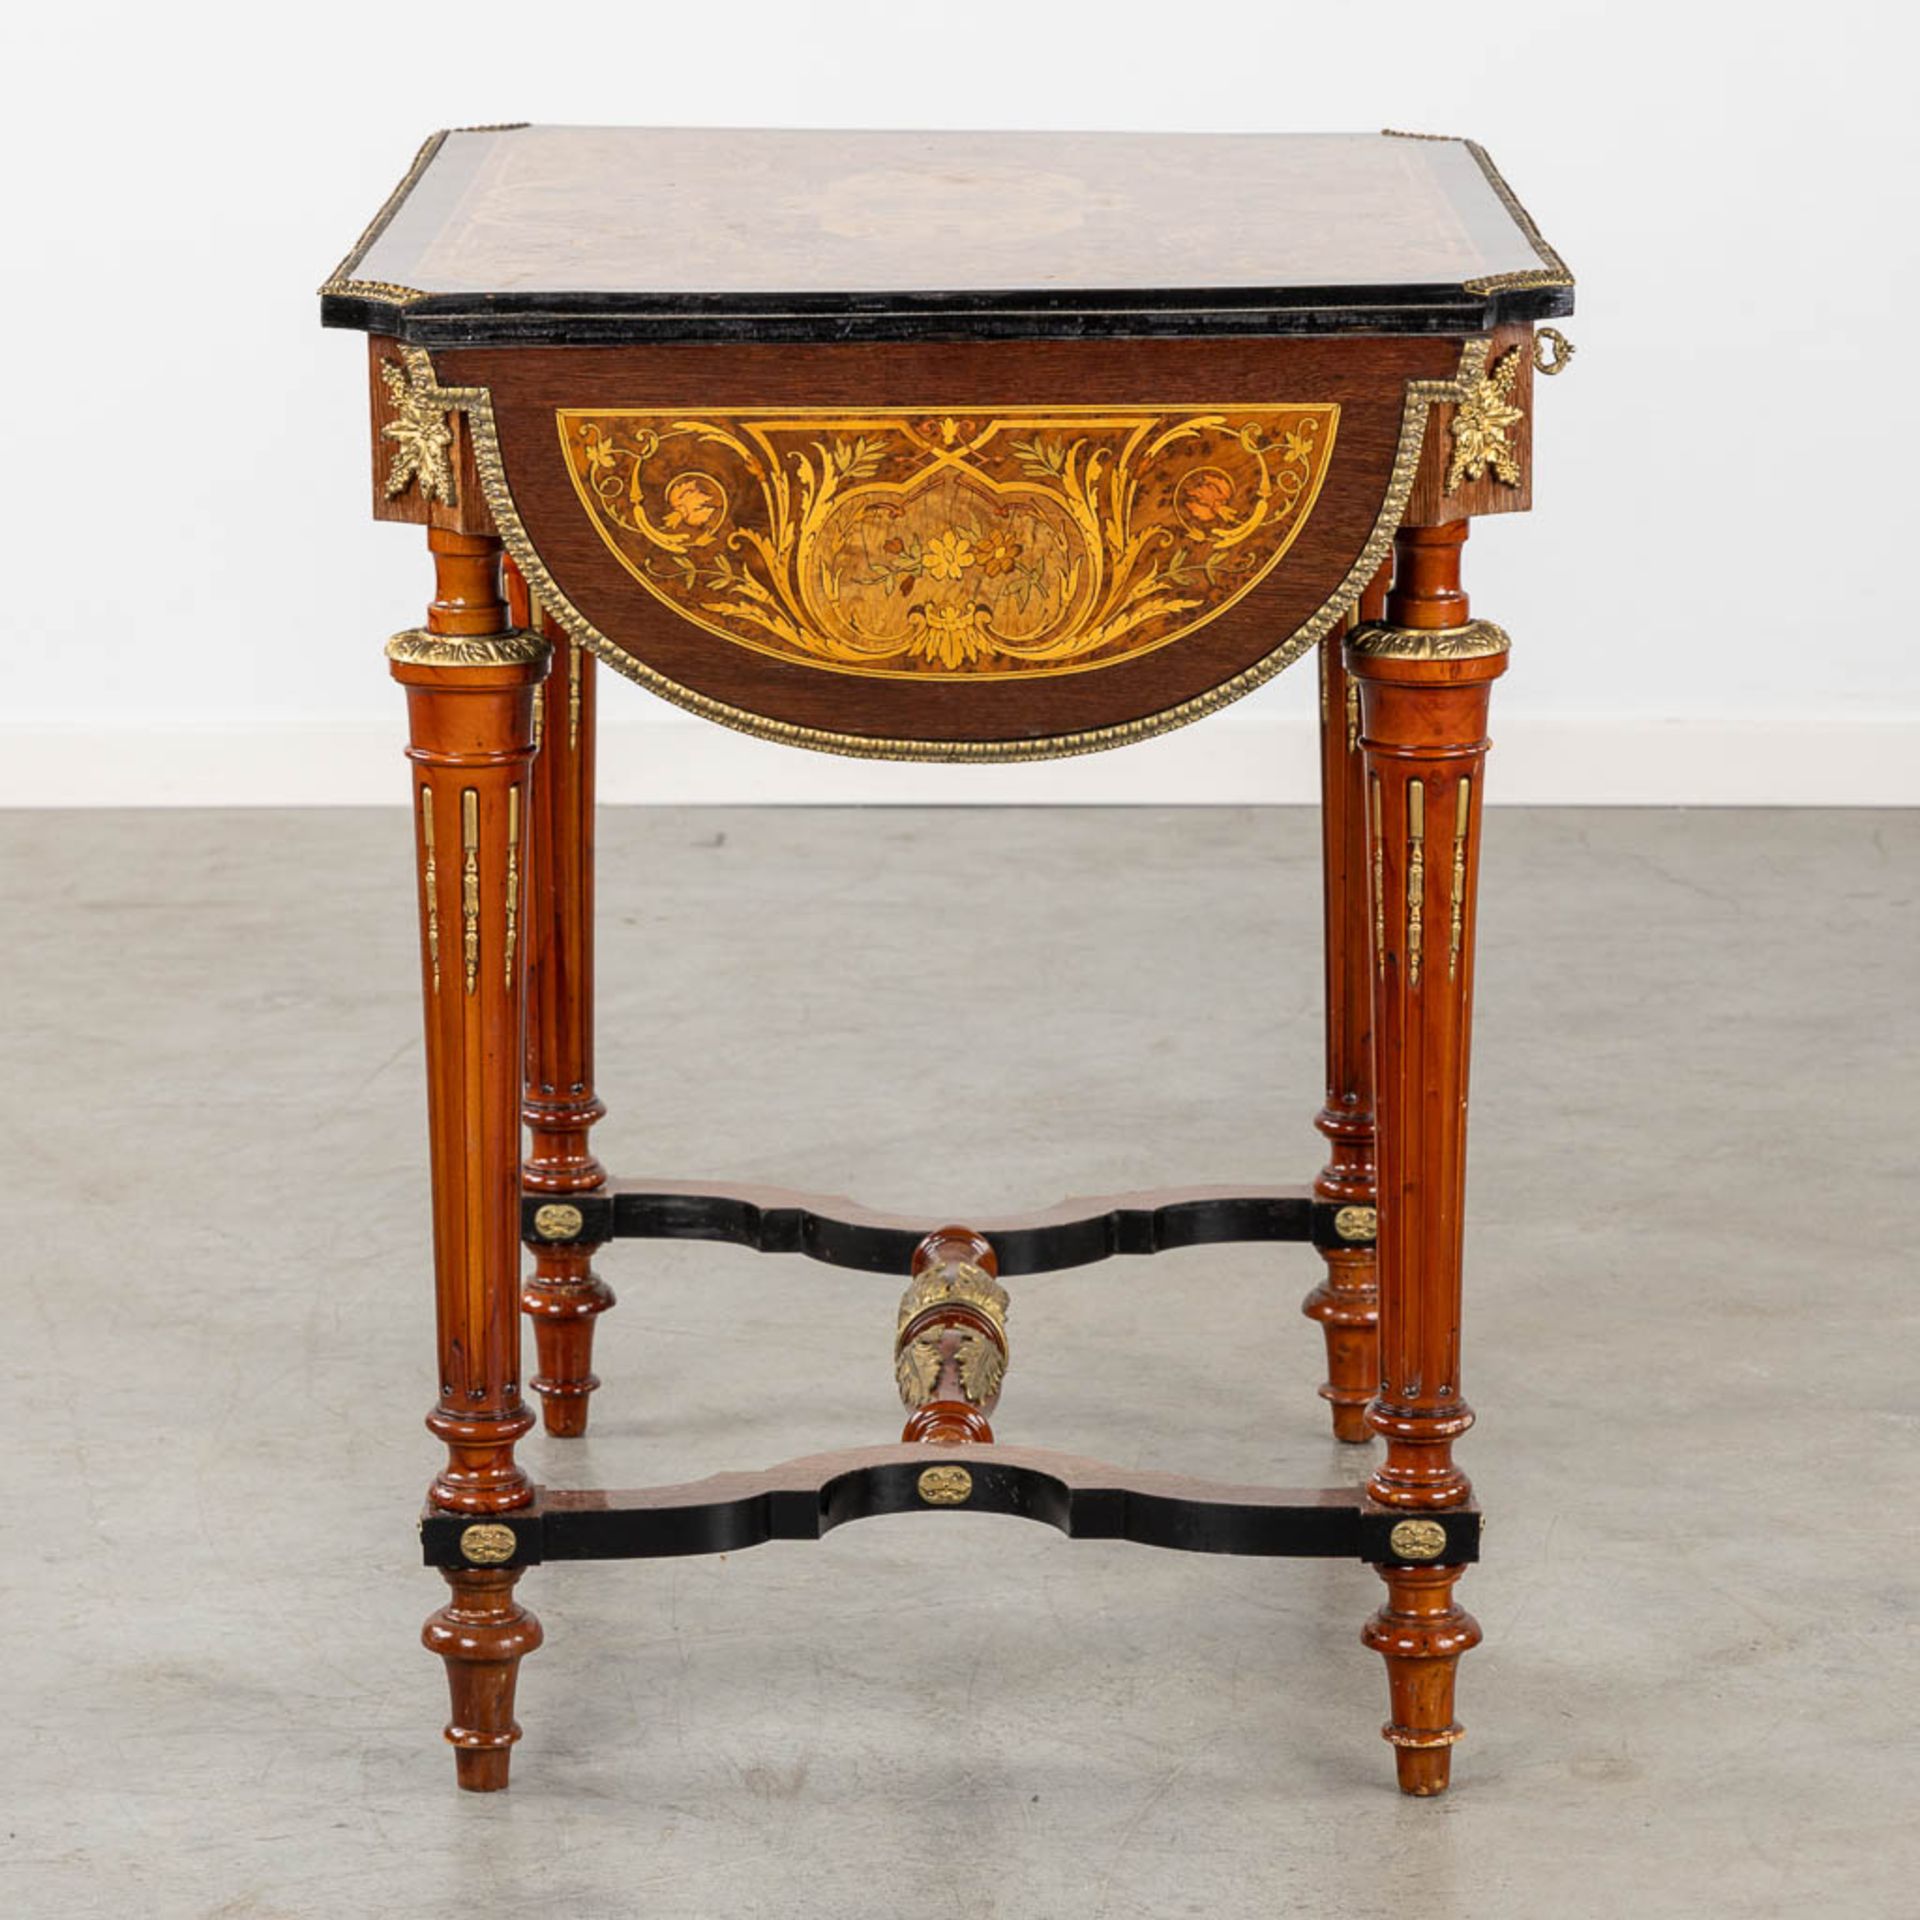 A side table/play table, marquetry inlay and mounted with bronze. 20th C. (L:57 x W:115 x H:74 cm) - Bild 8 aus 19